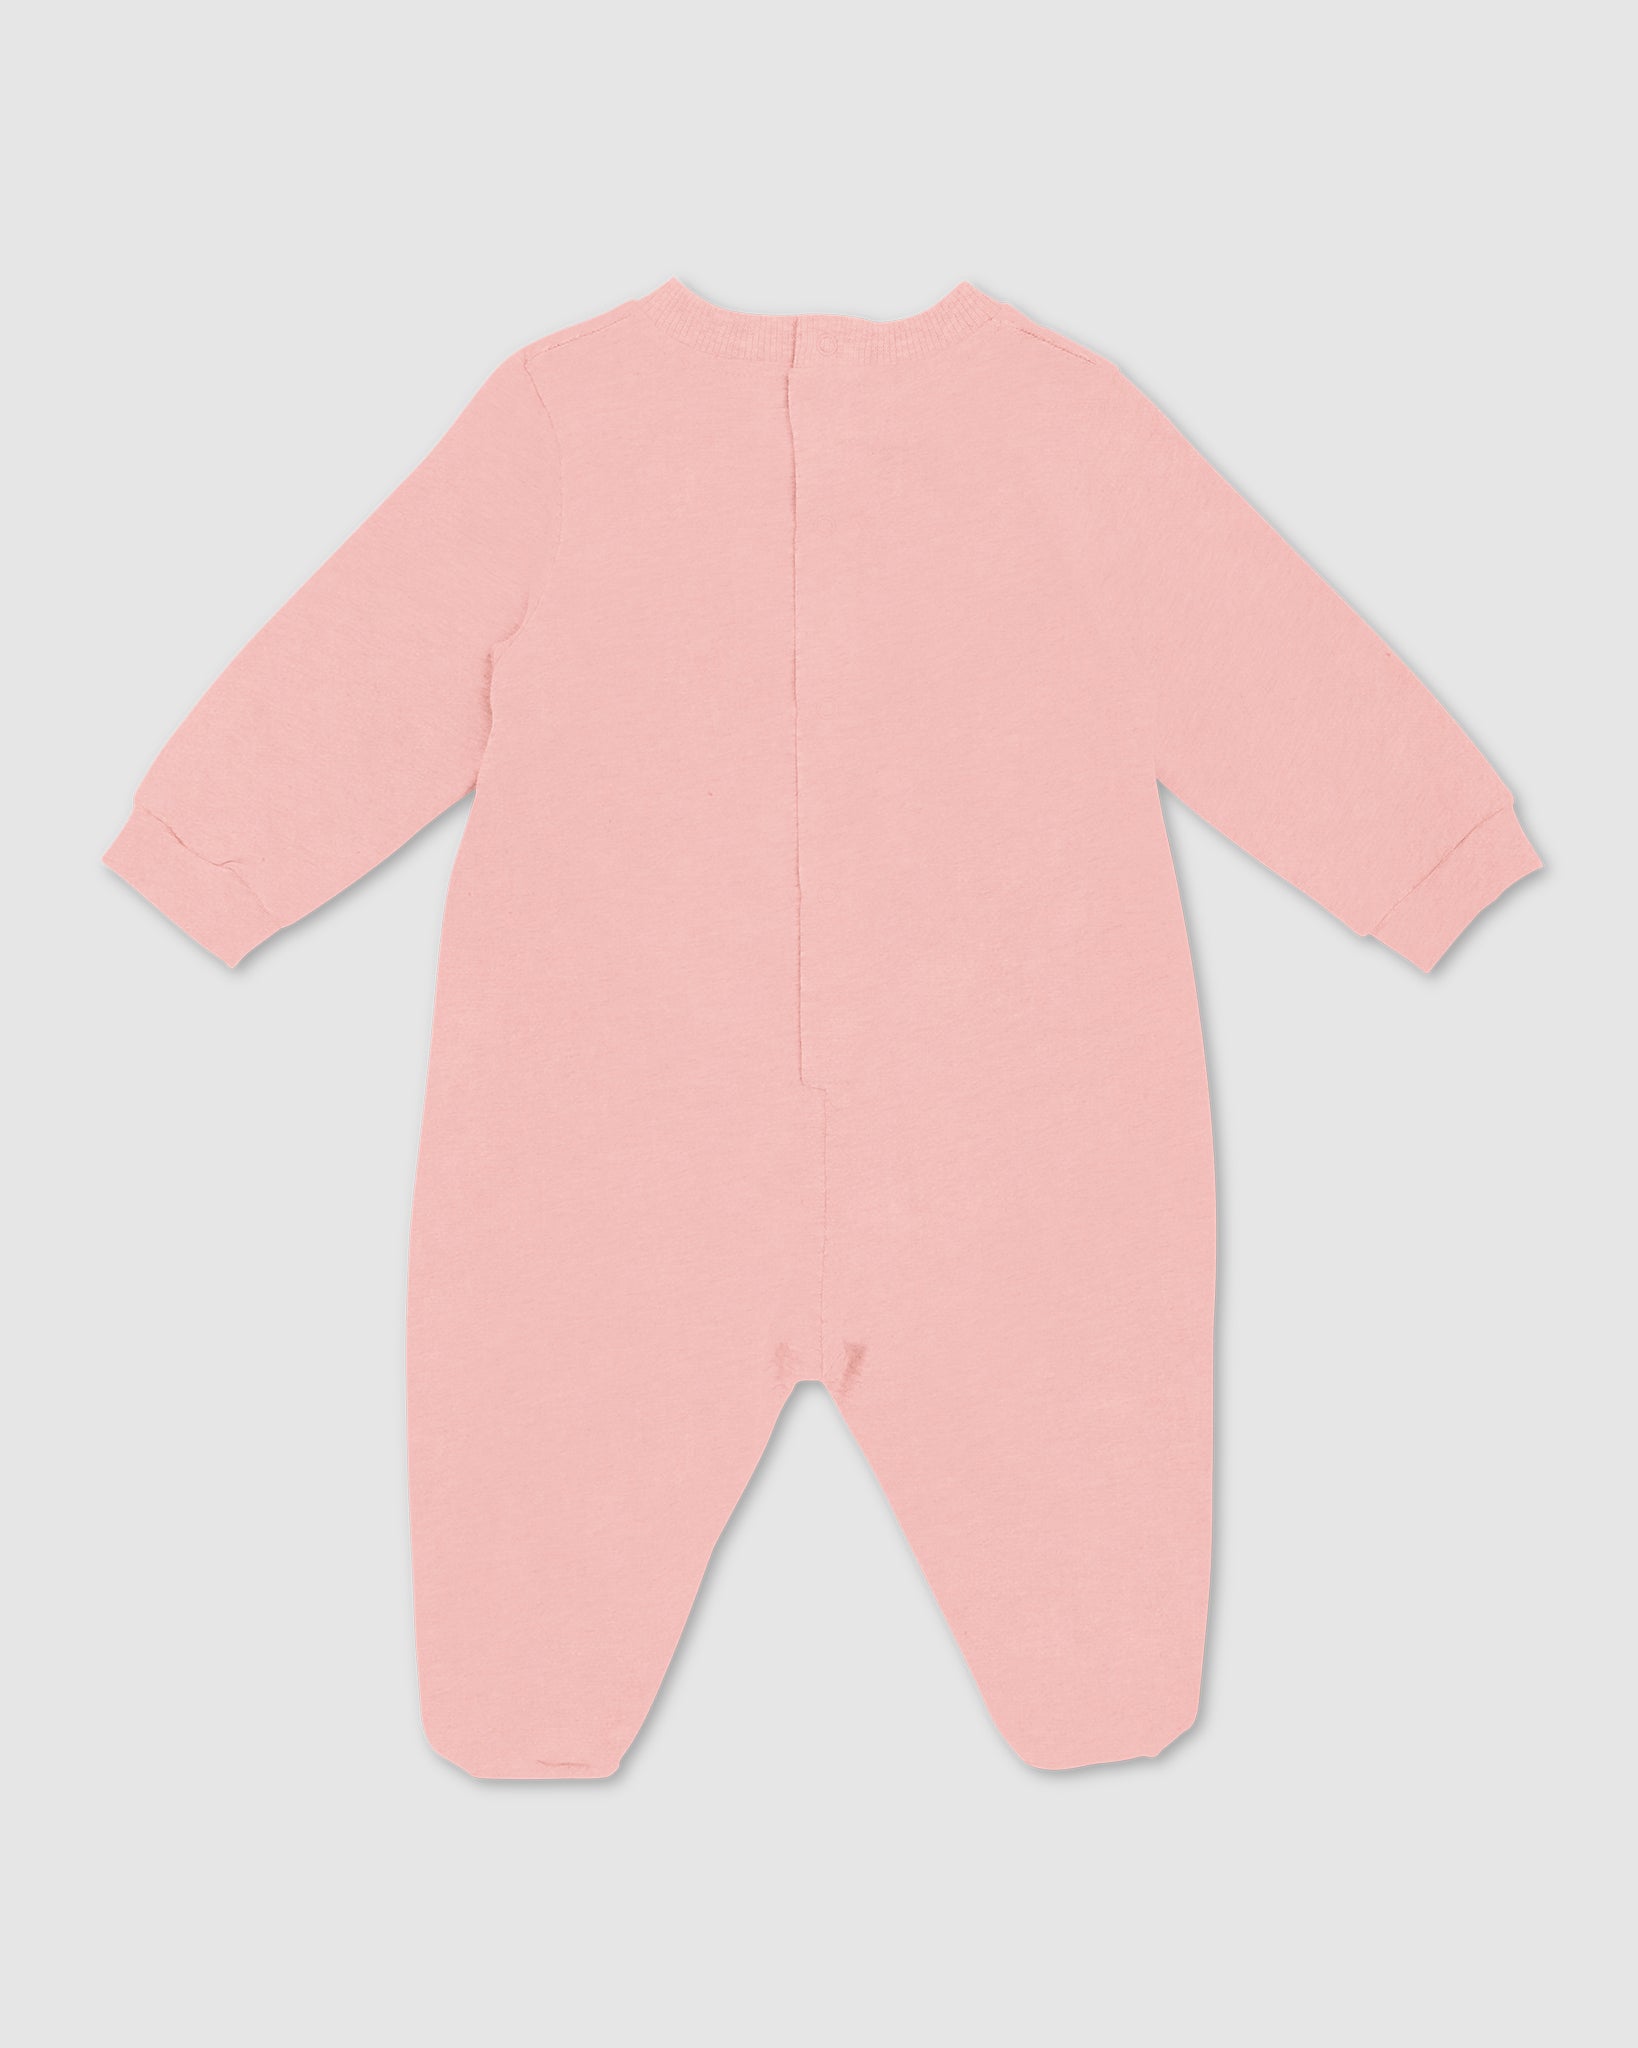 Baby Cherry Playsuit: Girl Playsuits White/Pink GCDS Gift and Off | Set